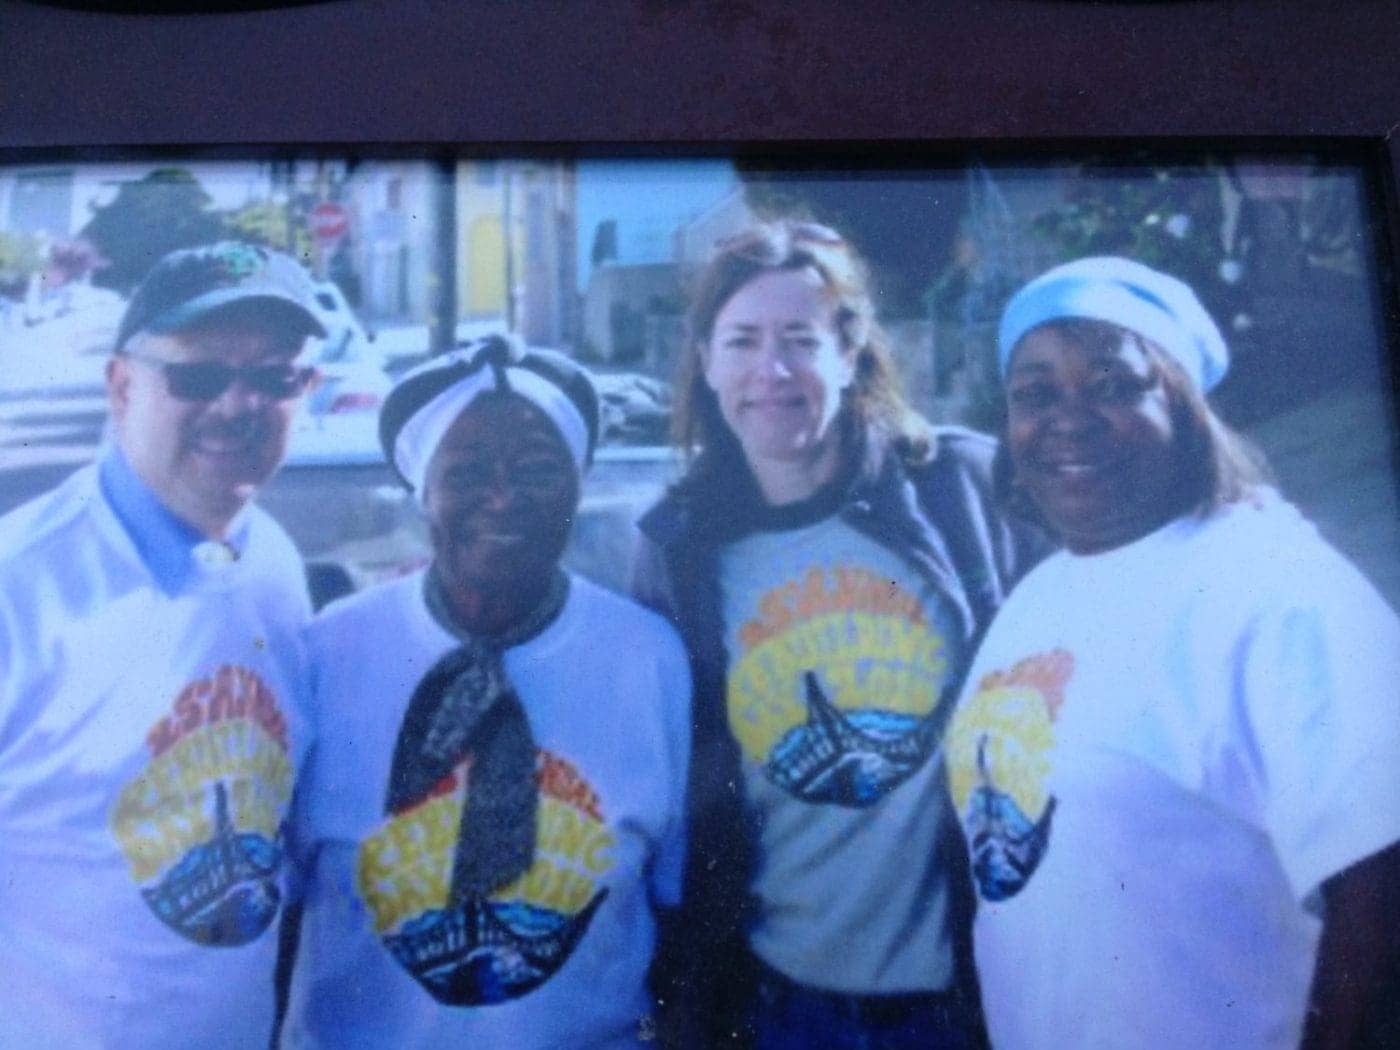 Mayor-Ed-Lee-Izola-Frierson-a-volunteer-author-Kathy-Frierson-celebrate-Christmas-2016-1400x1050, Happy 100th birthday, Queen Izola of Bayview Hunters Point!, Culture Currents 